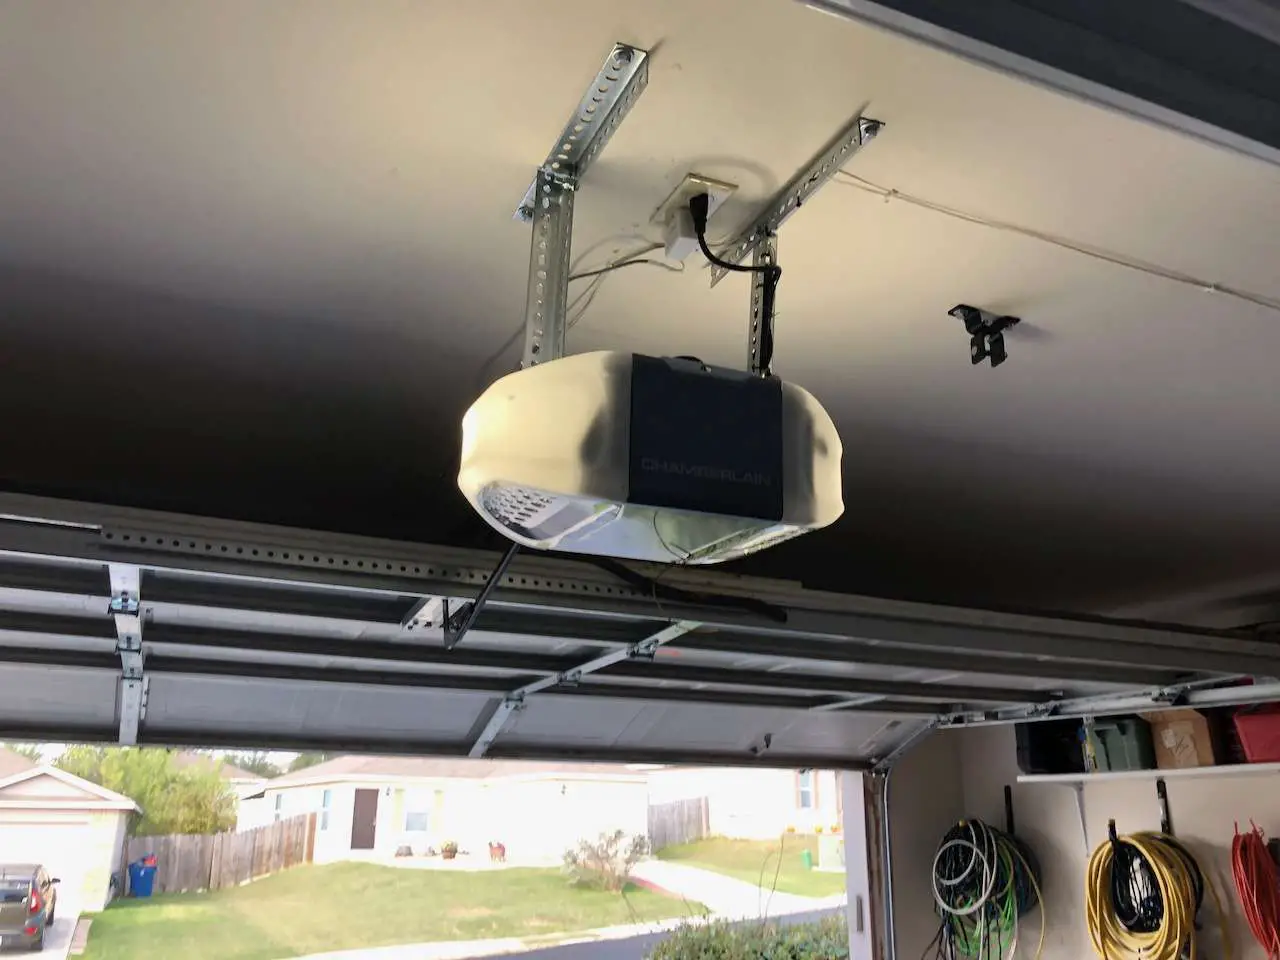 Liftmaster Garage Door Keeps Opening And Closing Unexpectedly – Causes and Solutions